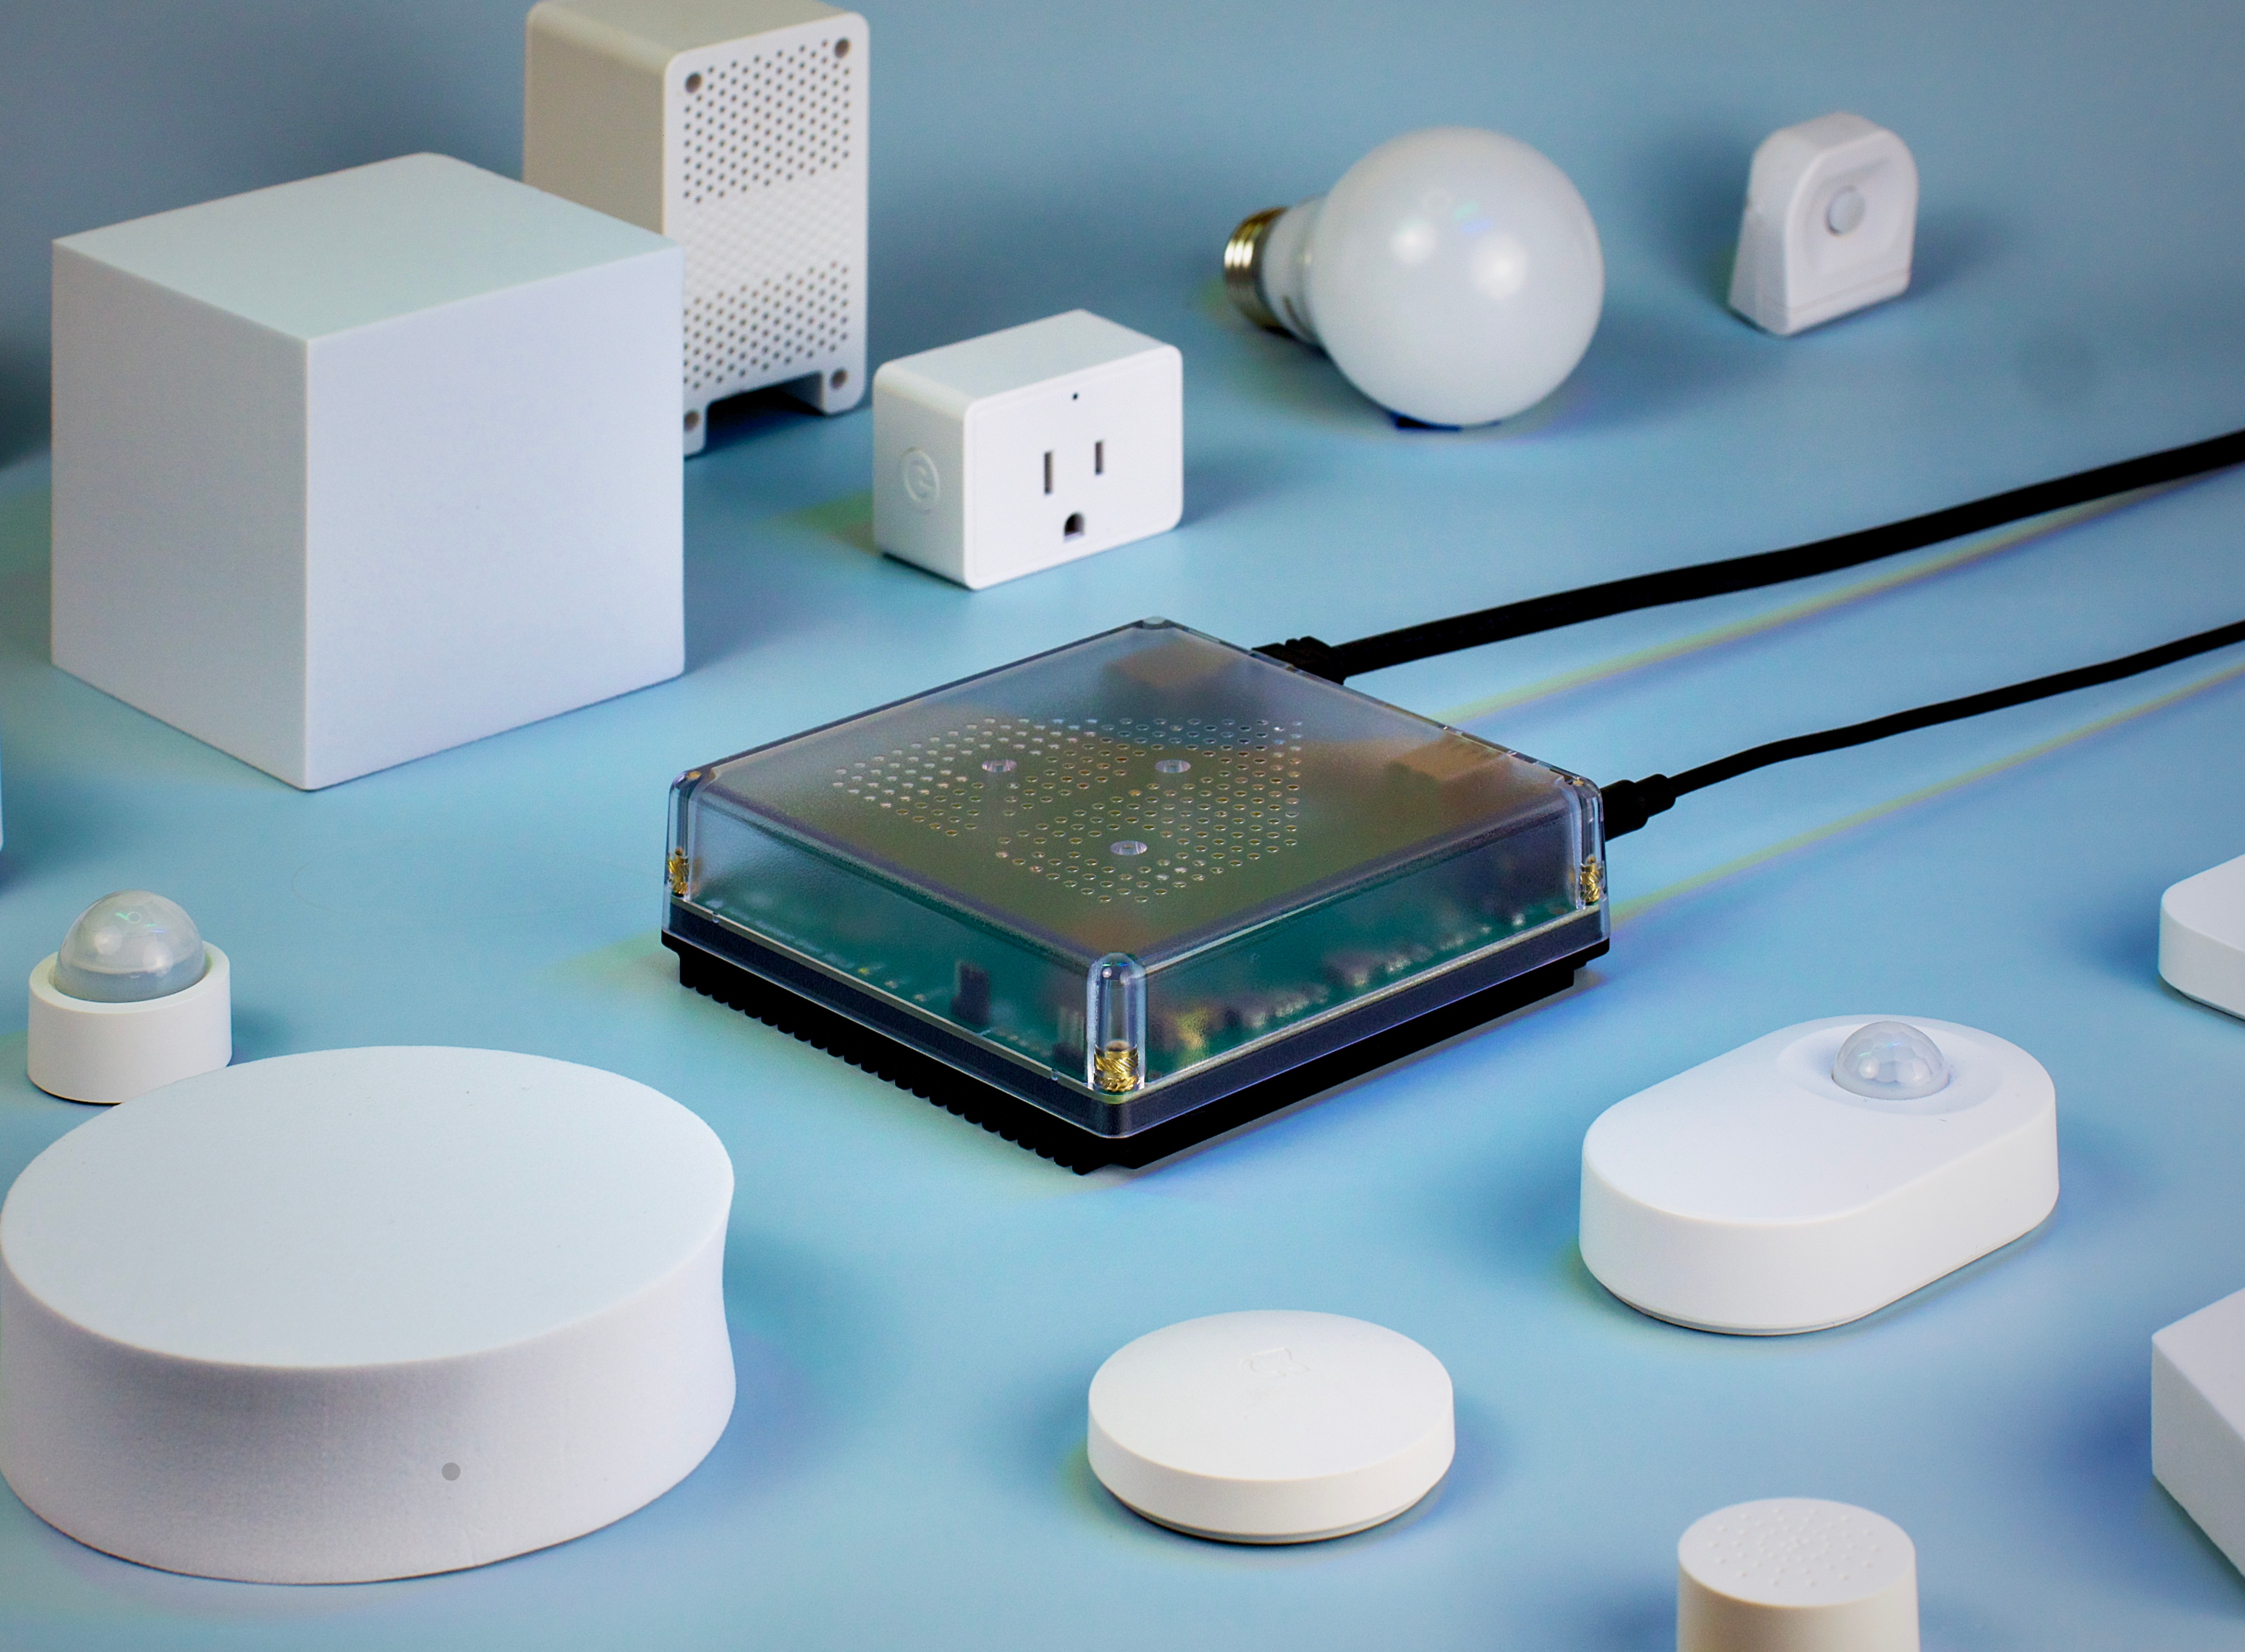 Image of Green device amidst IoT devices